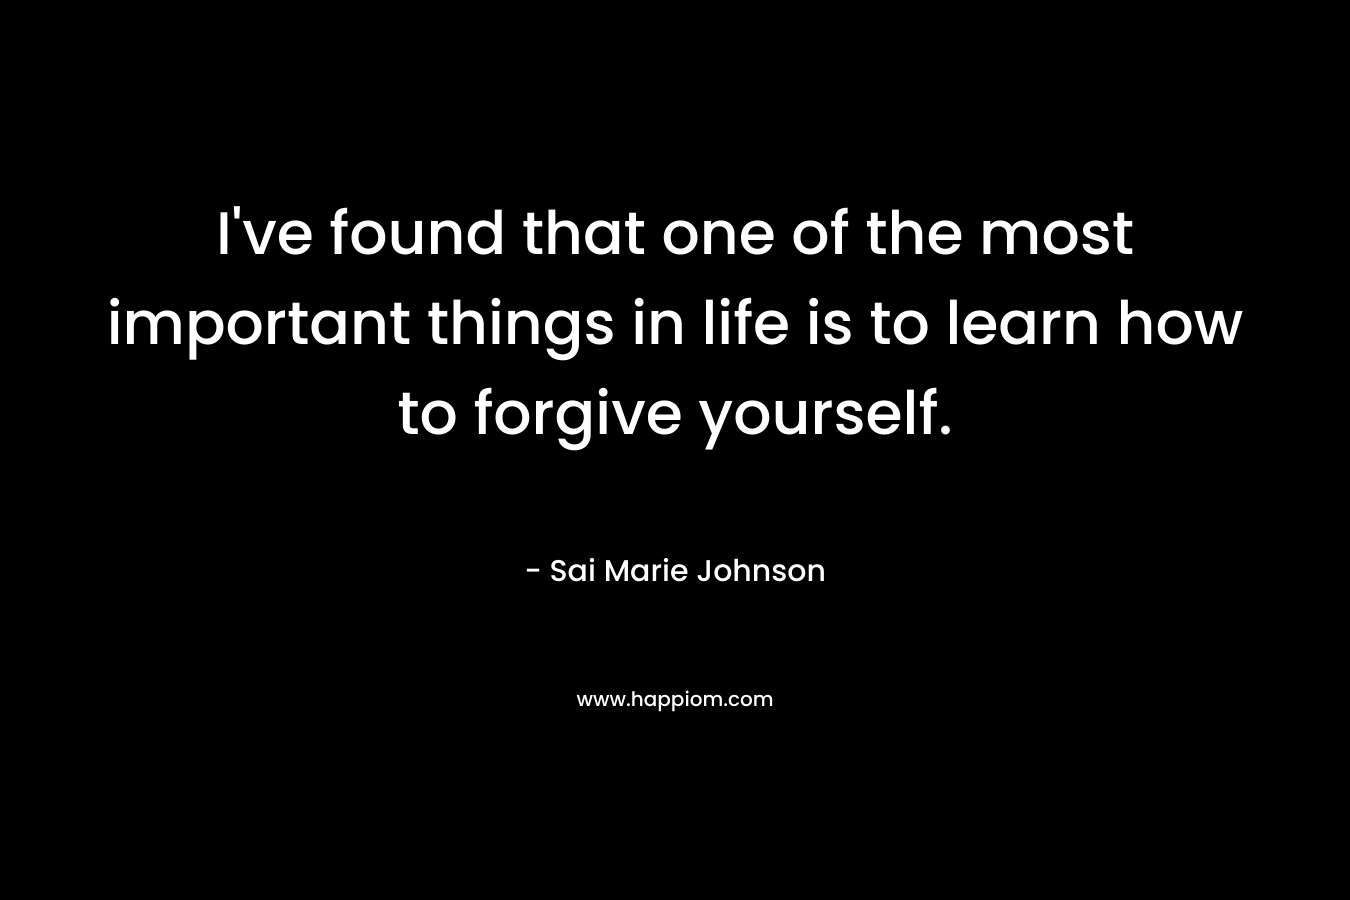 I’ve found that one of the most important things in life is to learn how to forgive yourself. – Sai Marie Johnson